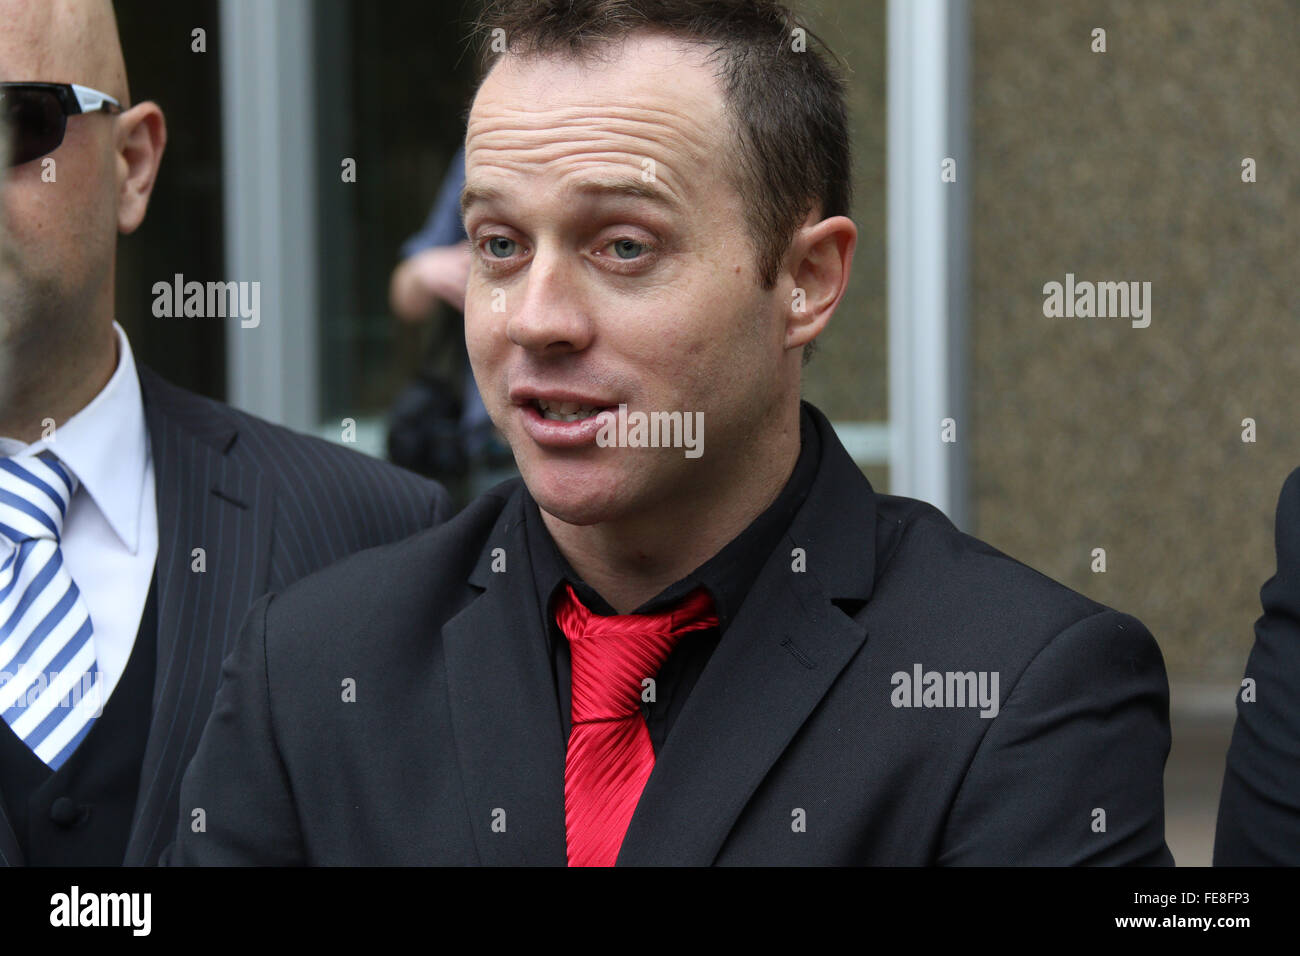 Sydney, Australia. 5 February 2016. Nick Folkes, Chairman of the Party for Freedom and Shermon Burgess, known as The Great Aussie Patriot left the Federal Court Australia after attending a directions hearing. They were jubilant that Sutherland Shire Council and Jamal Rifi had discontinued their legal action against them. Supporters including Ralph Cerminara attended the hearing. Left wing activist Shayne Hunter attended the hearing and afterwards went for a drink with the pariots. Pictured: Shermon Burgess, ‘The Great Aussie Patriot’ (red tie). Credit:  Richard Milnes/Alamy Live News Stock Photo